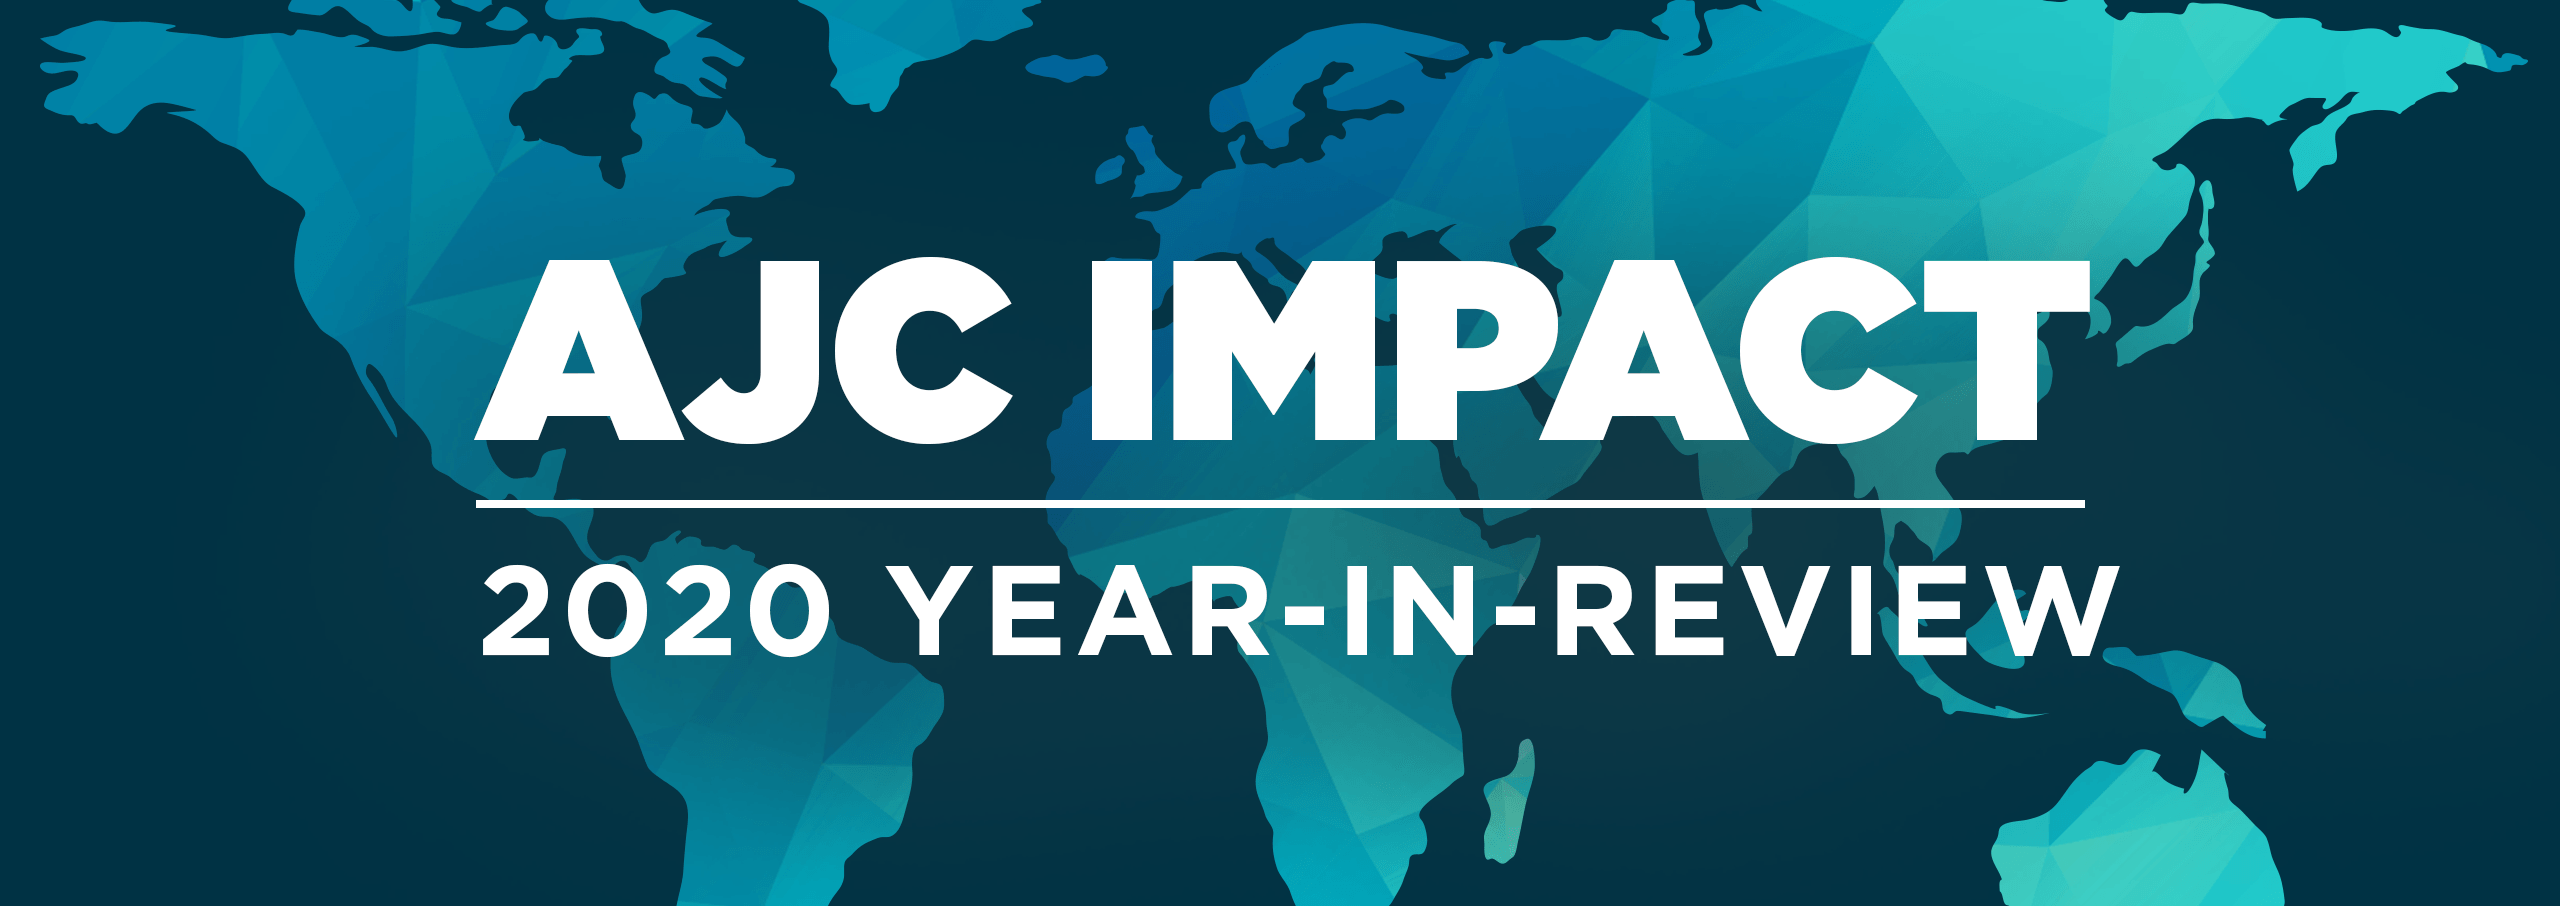 AJC IMPACT | 2020 Year-In-Review